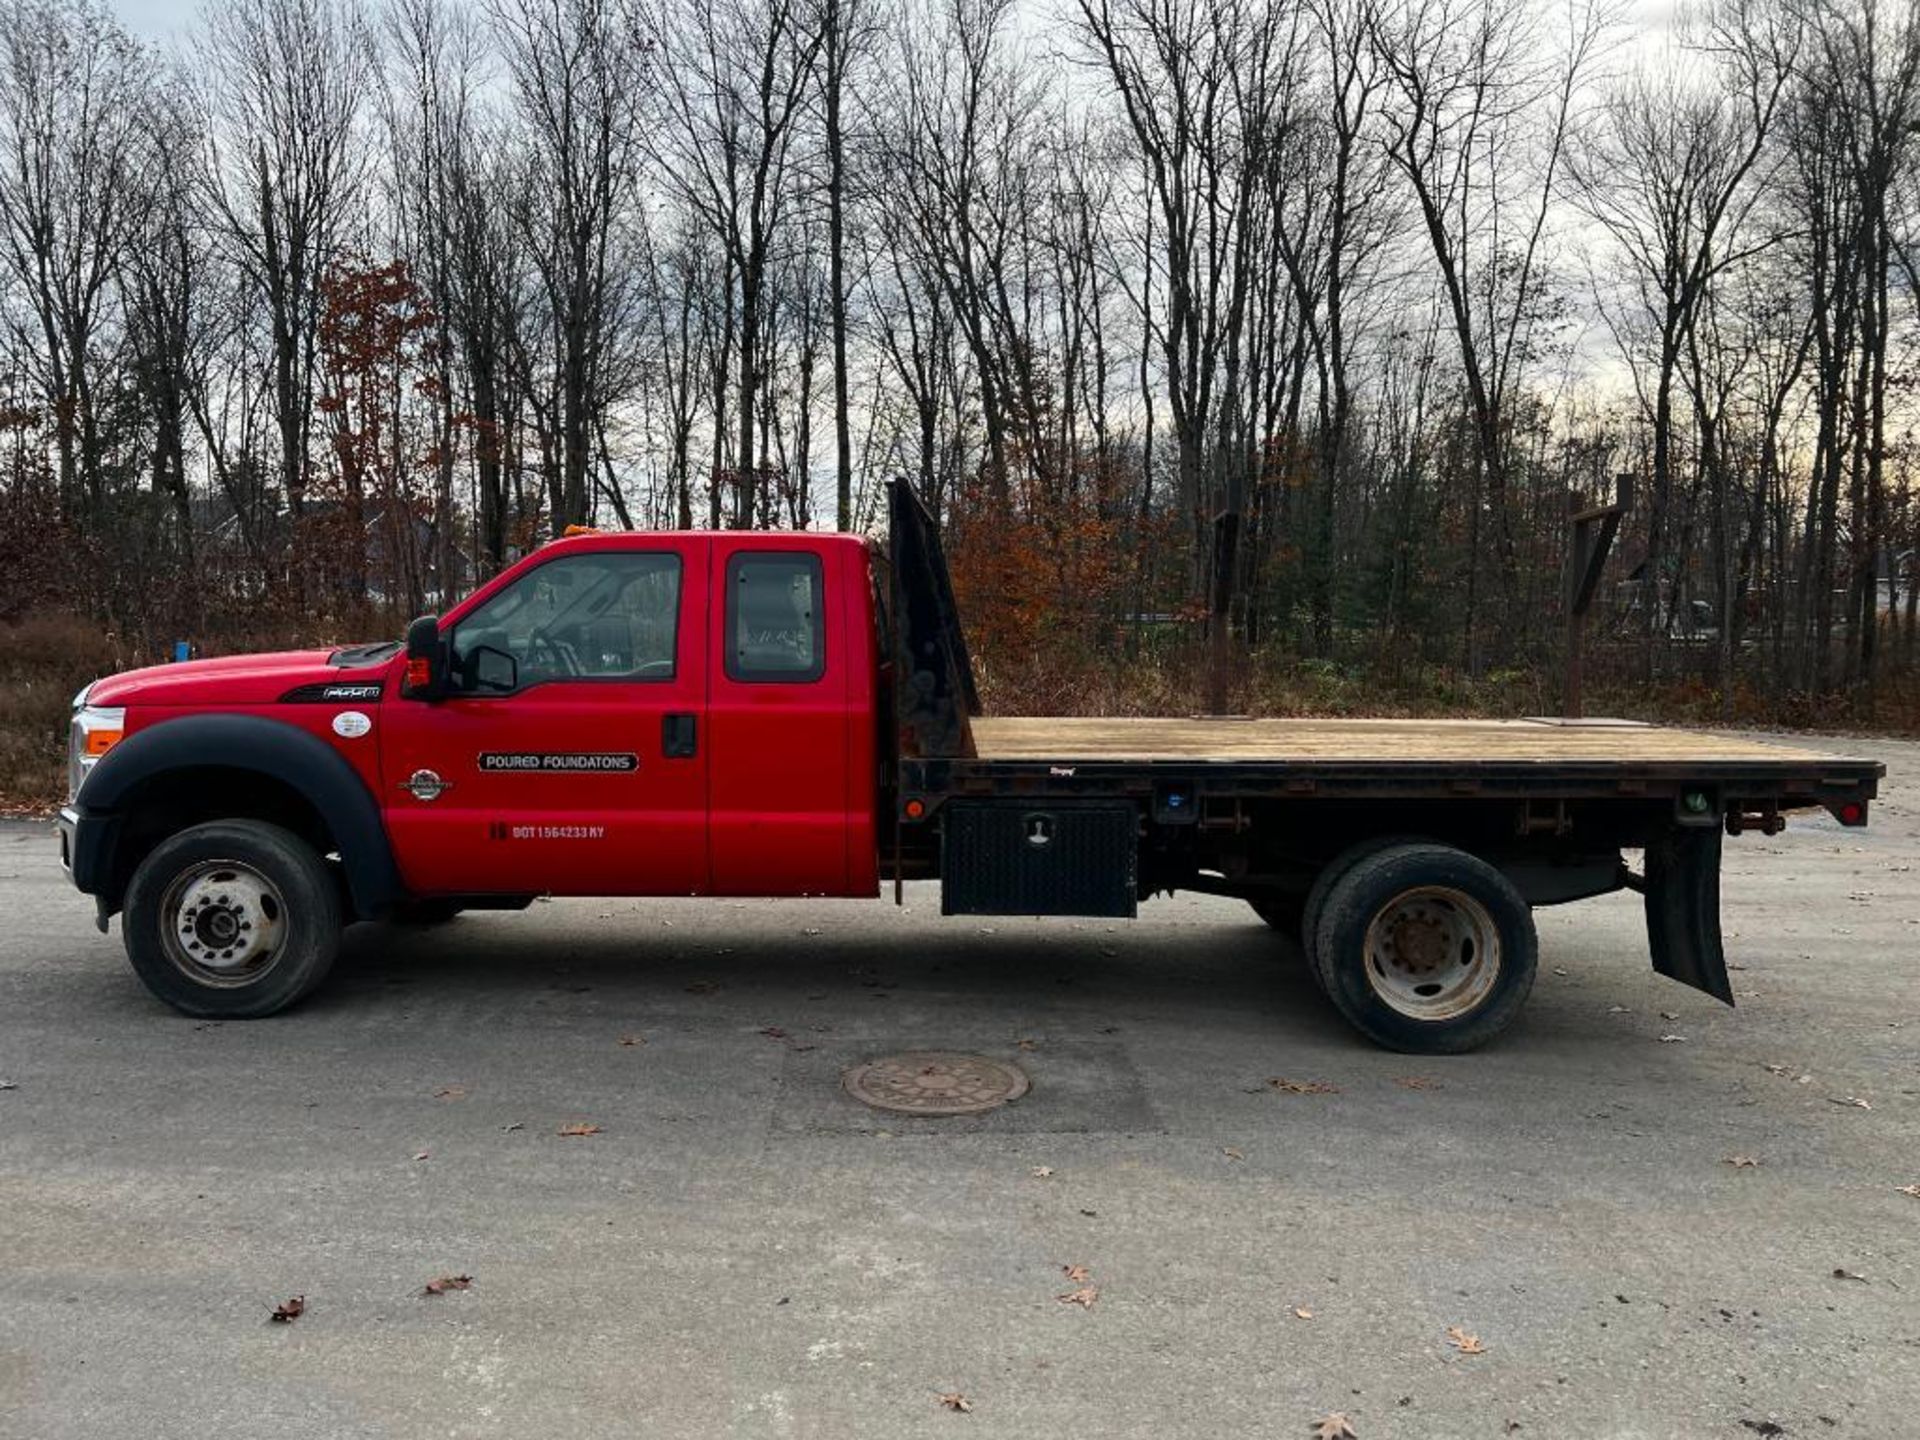 2016 Ford F550 Super Duty Power Stroke 6.7L truck, 4x4, dually, 98,306 miles, 8' x 12' flatbed, VIN: - Image 6 of 31